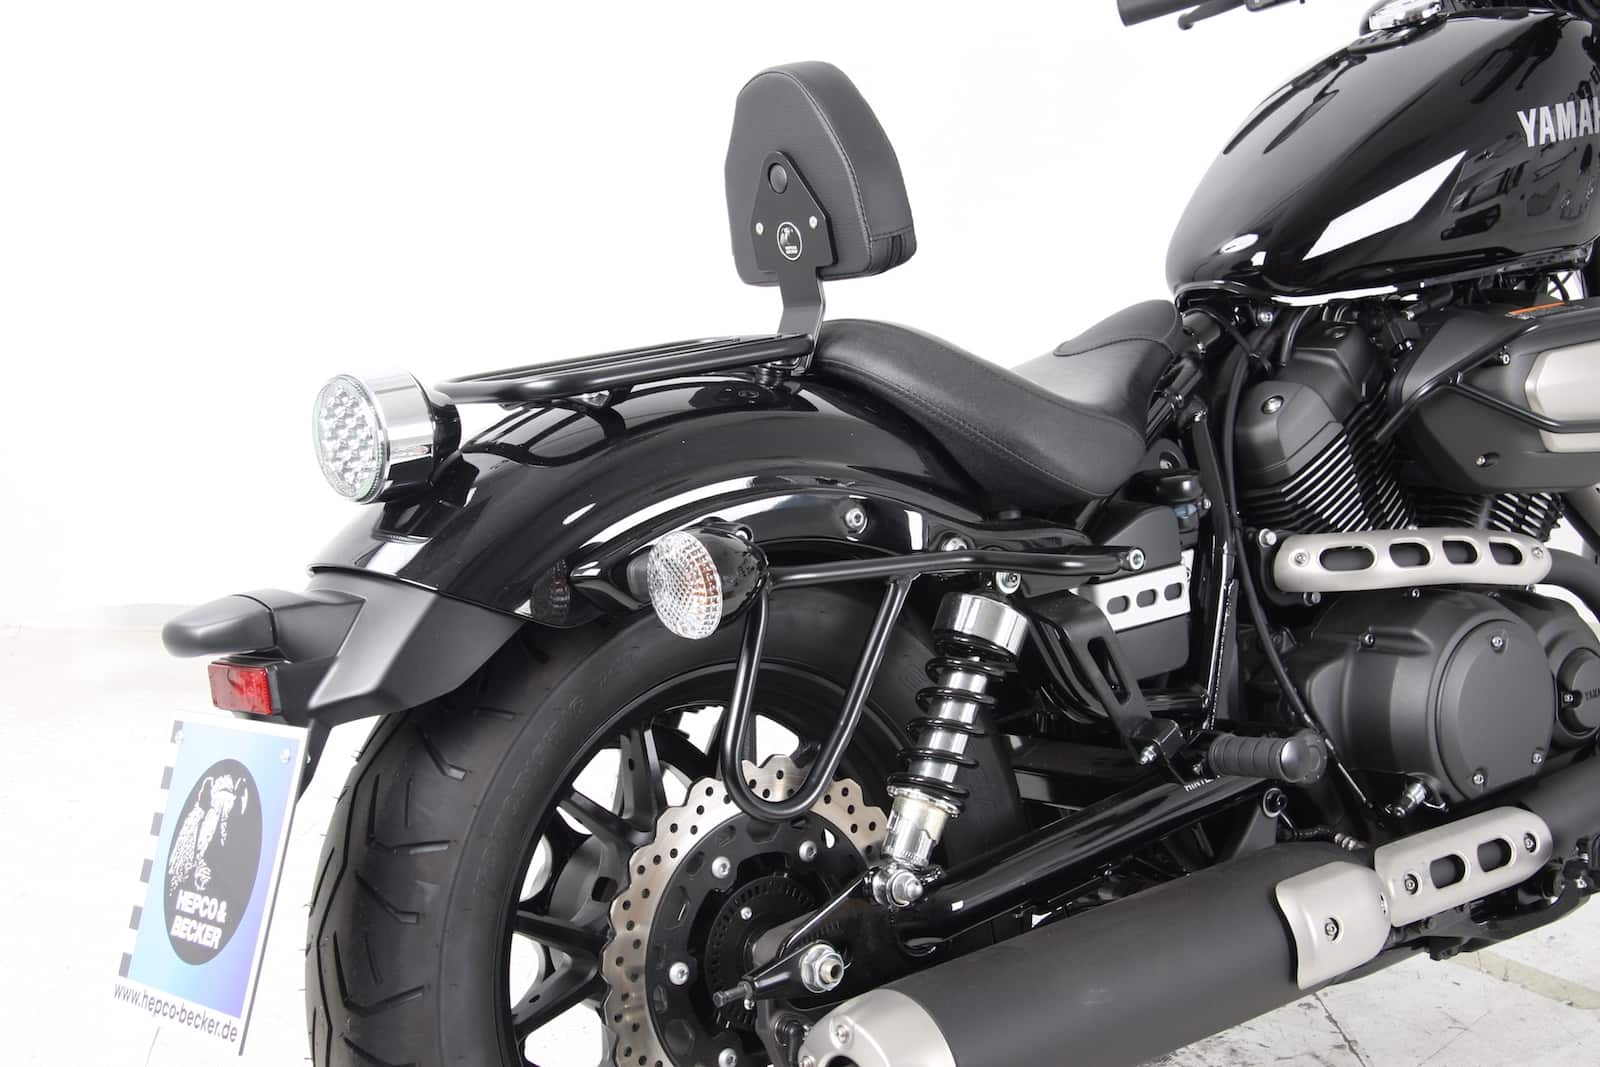 Accessories for Yamaha XV 950 / R (2013-2020) | Hepco & Becker